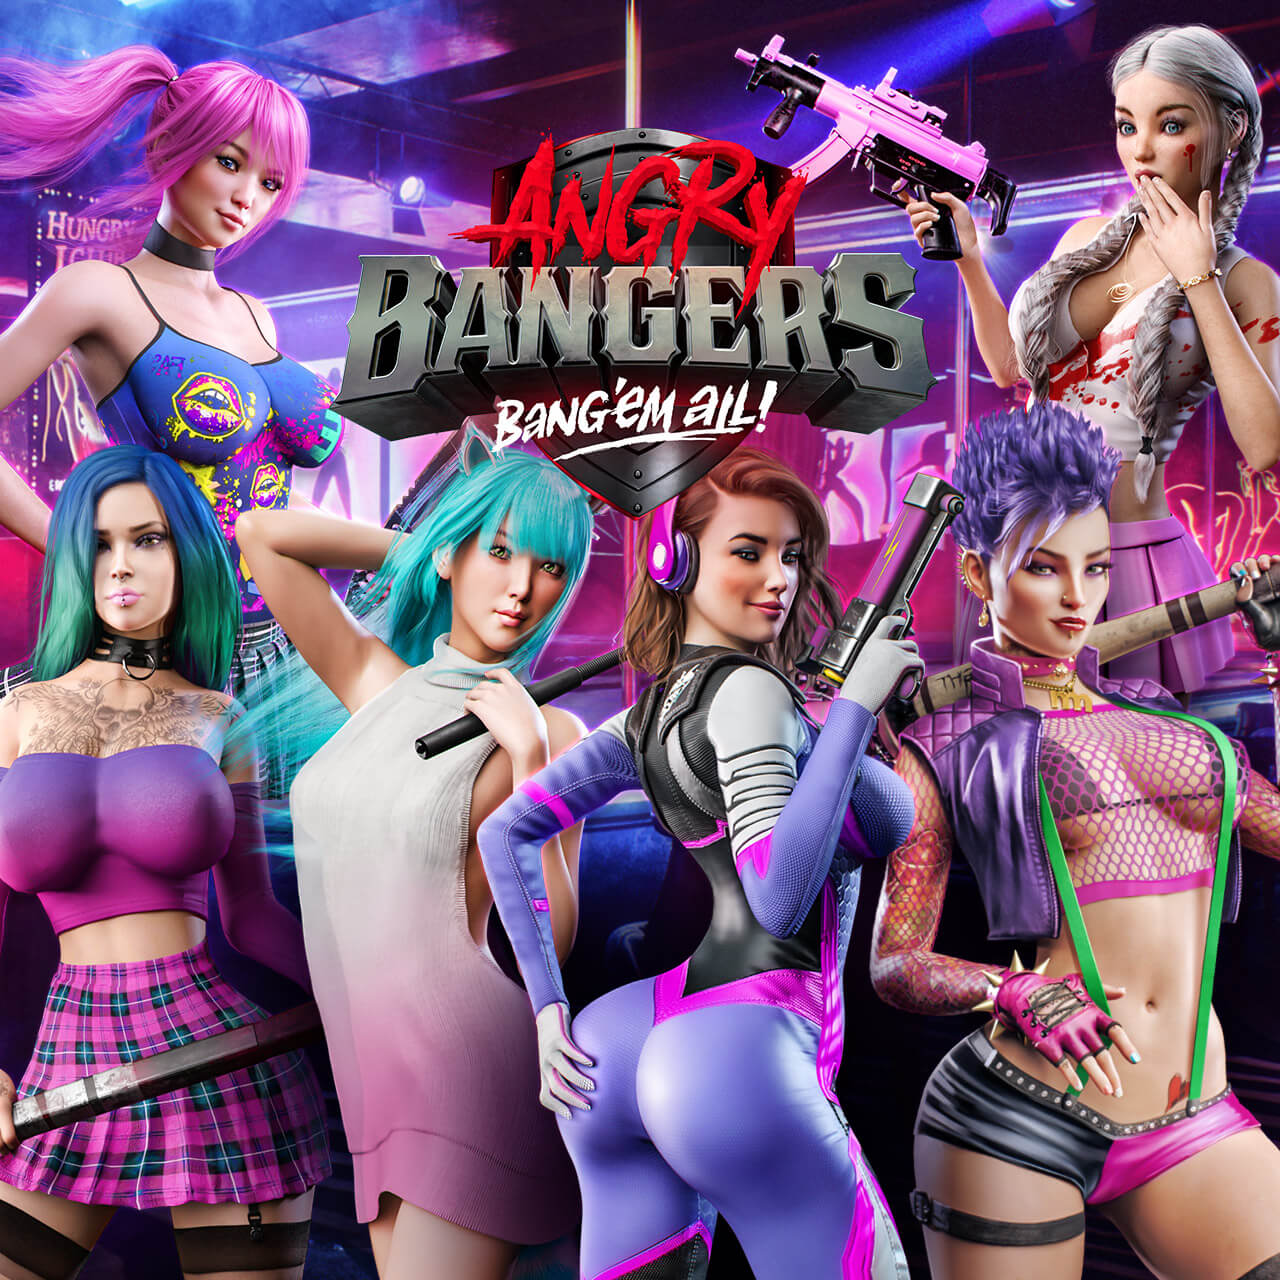 Angry Gamer Sex - Angry Bangers - Strategy Sex Game with APK file | Nutaku